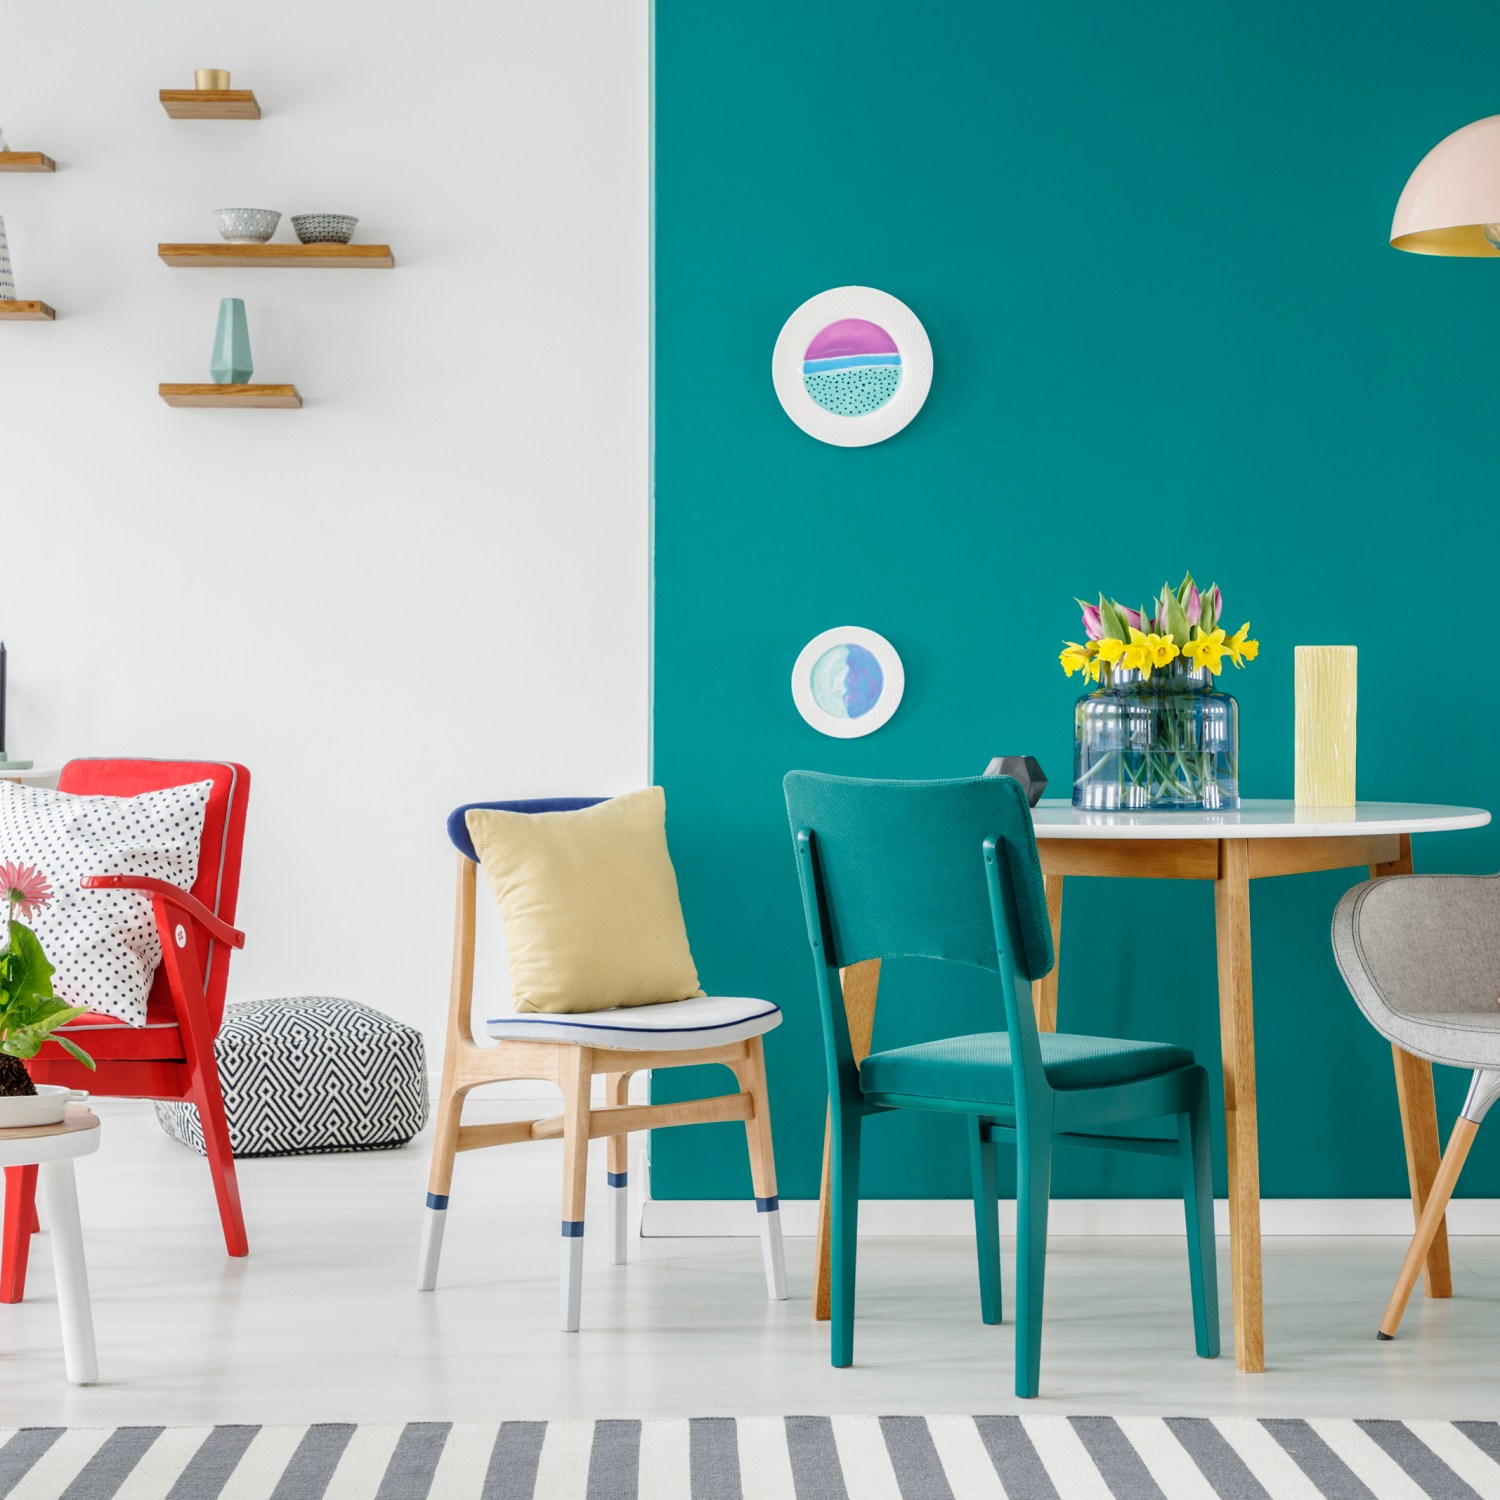 diy make house a home colorful chairs at wooden tables against green wall in apartment interior with flowers